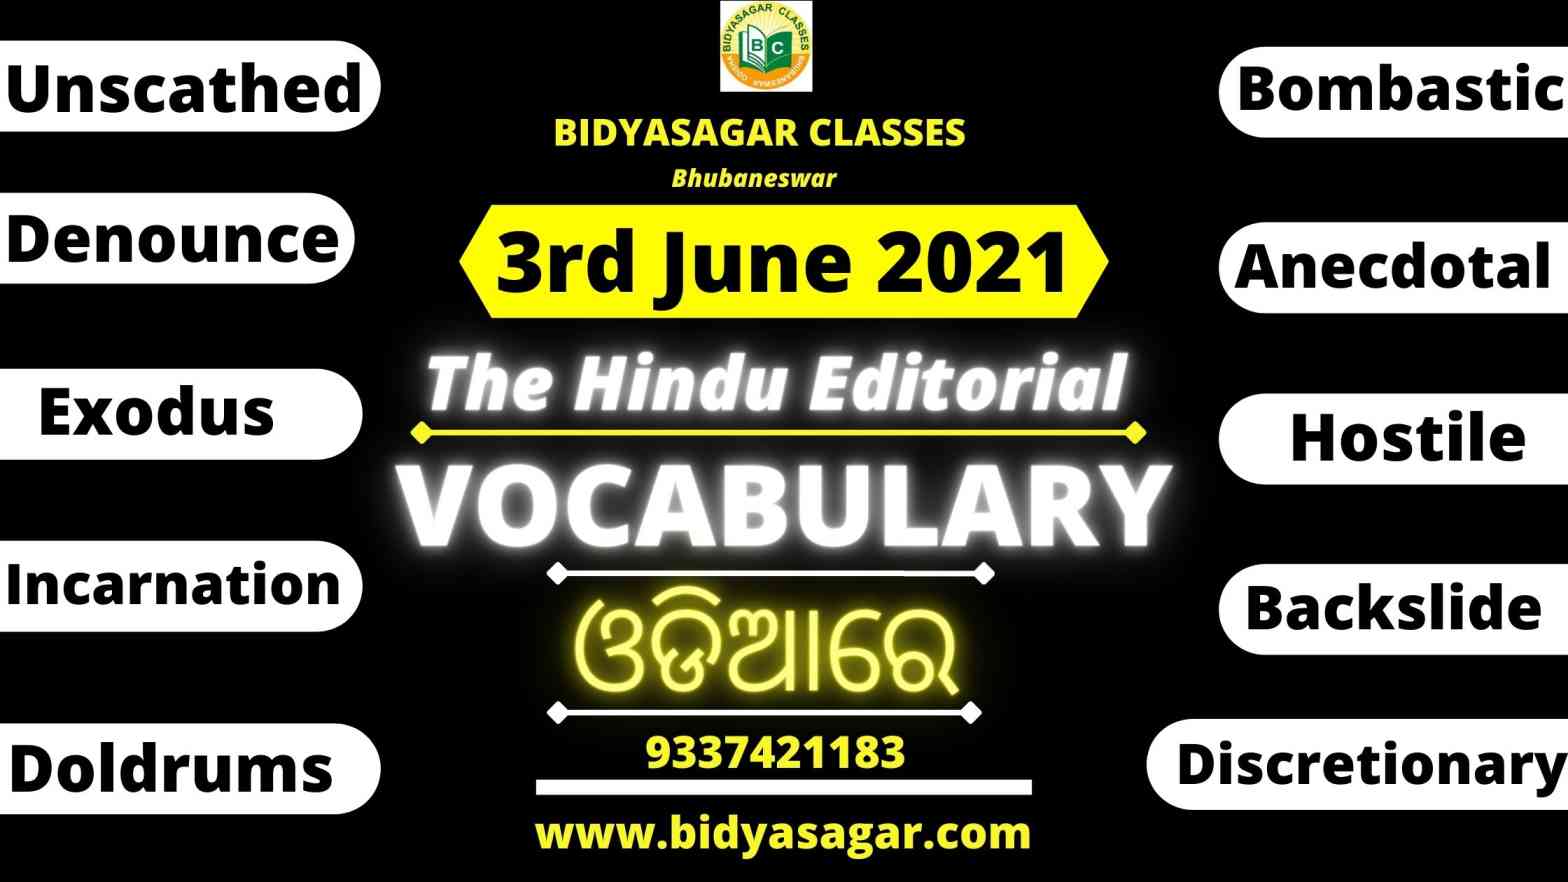 The Hindu Editorial Vocabulary of 3rd June 2021